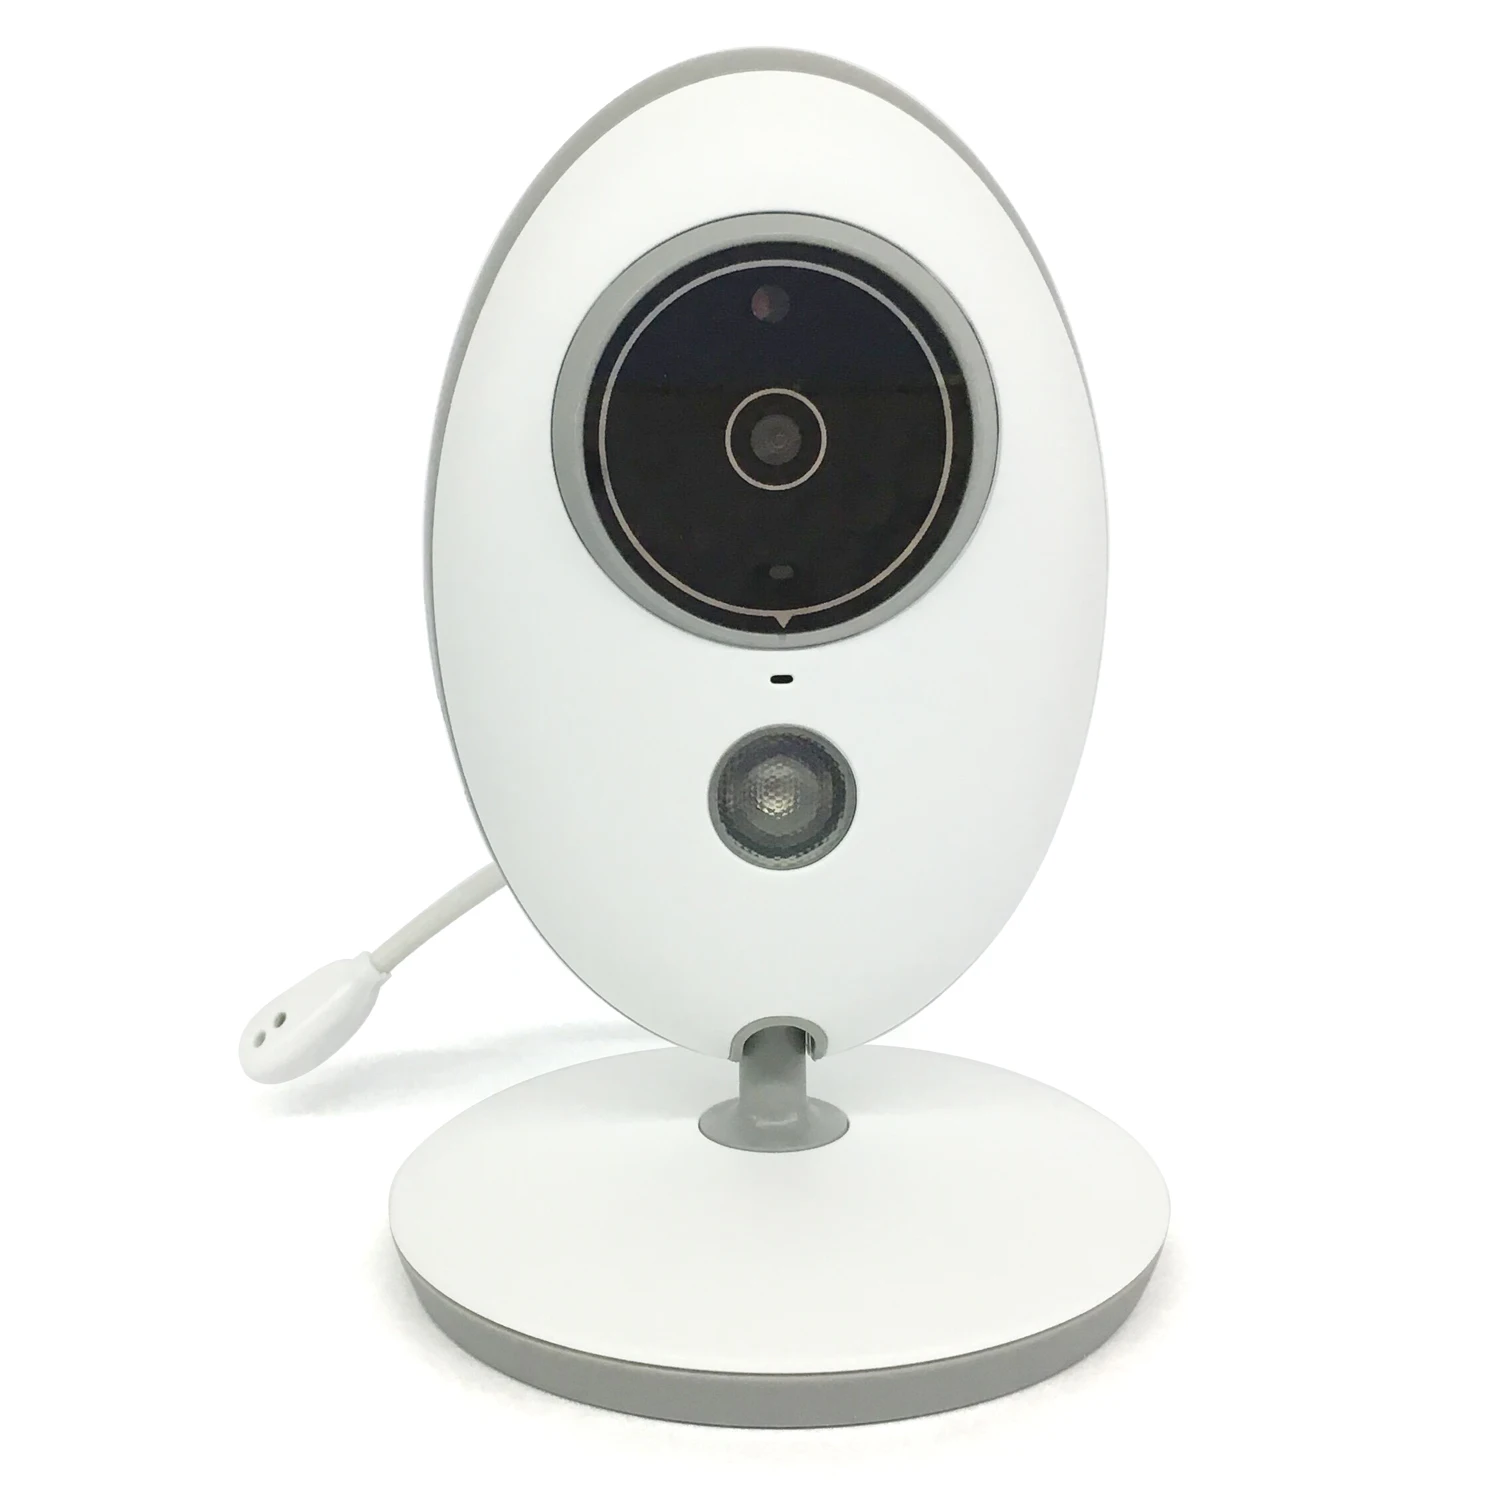 Wireless Video Baby Monitor VB605 Baby Care Security 2.4inch Colorful LCD Sreen Video Sleeping Night Vision Camera Video